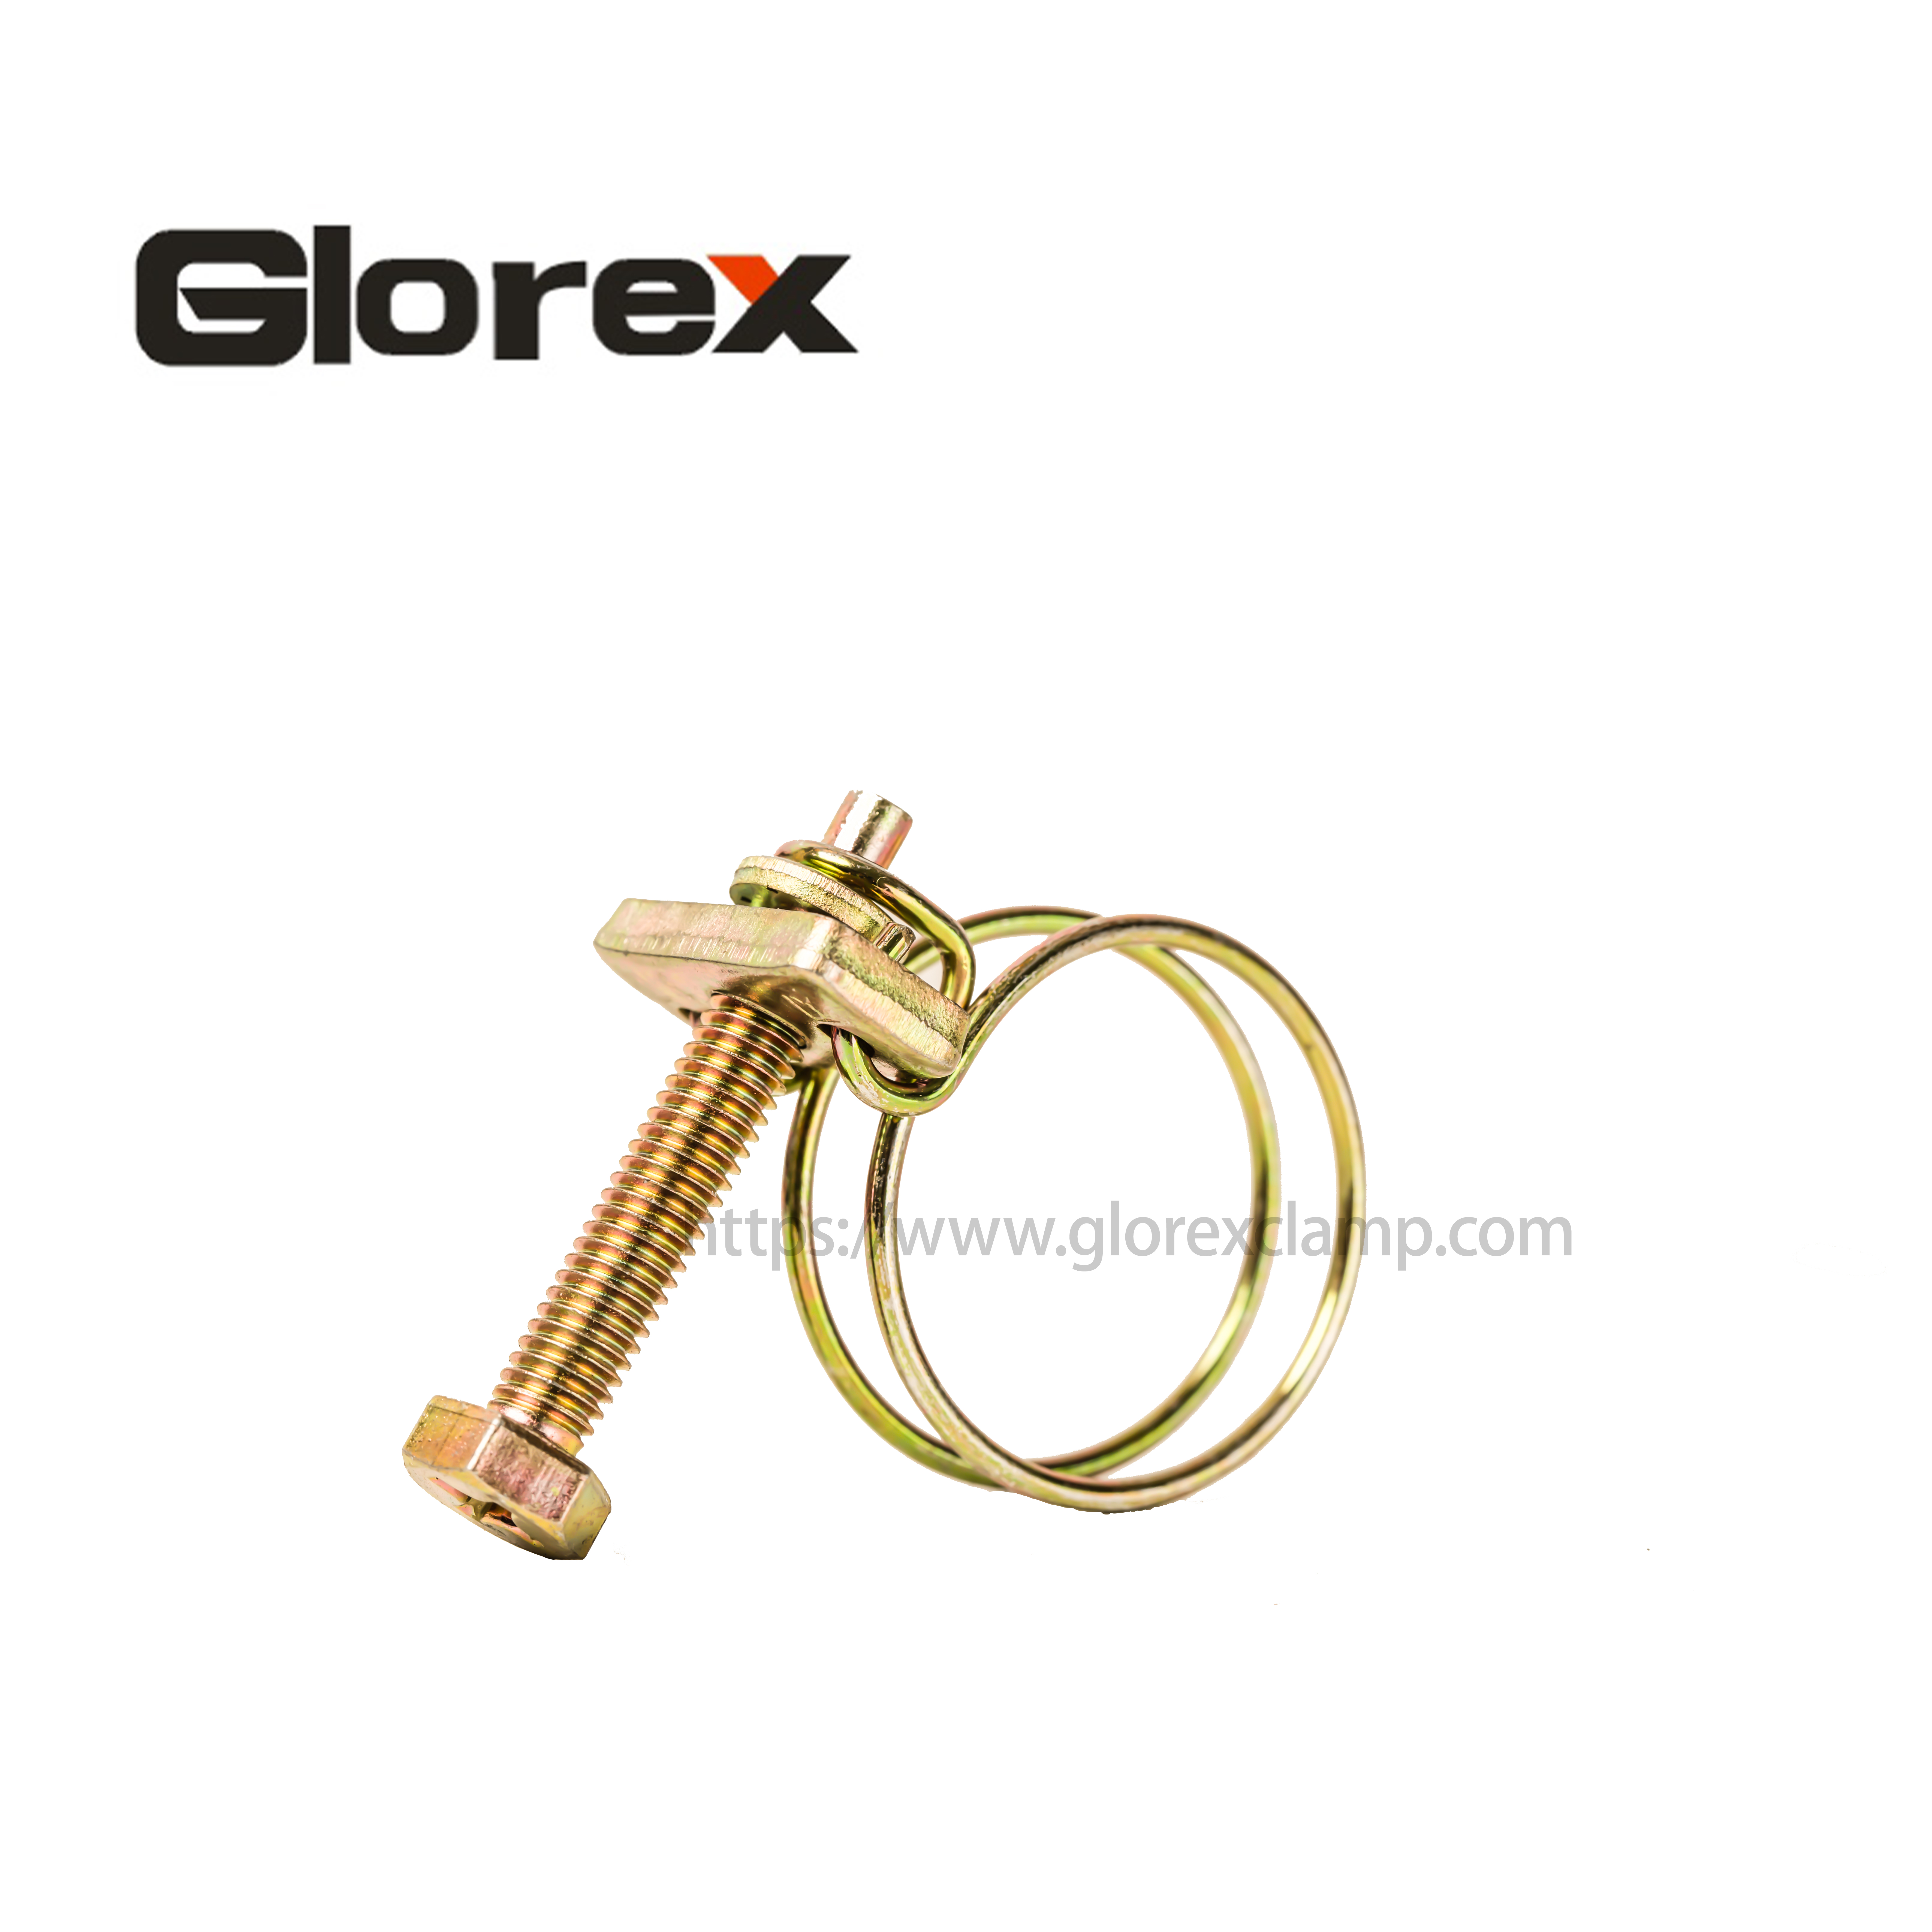 Double wire hose clamp Featured Image